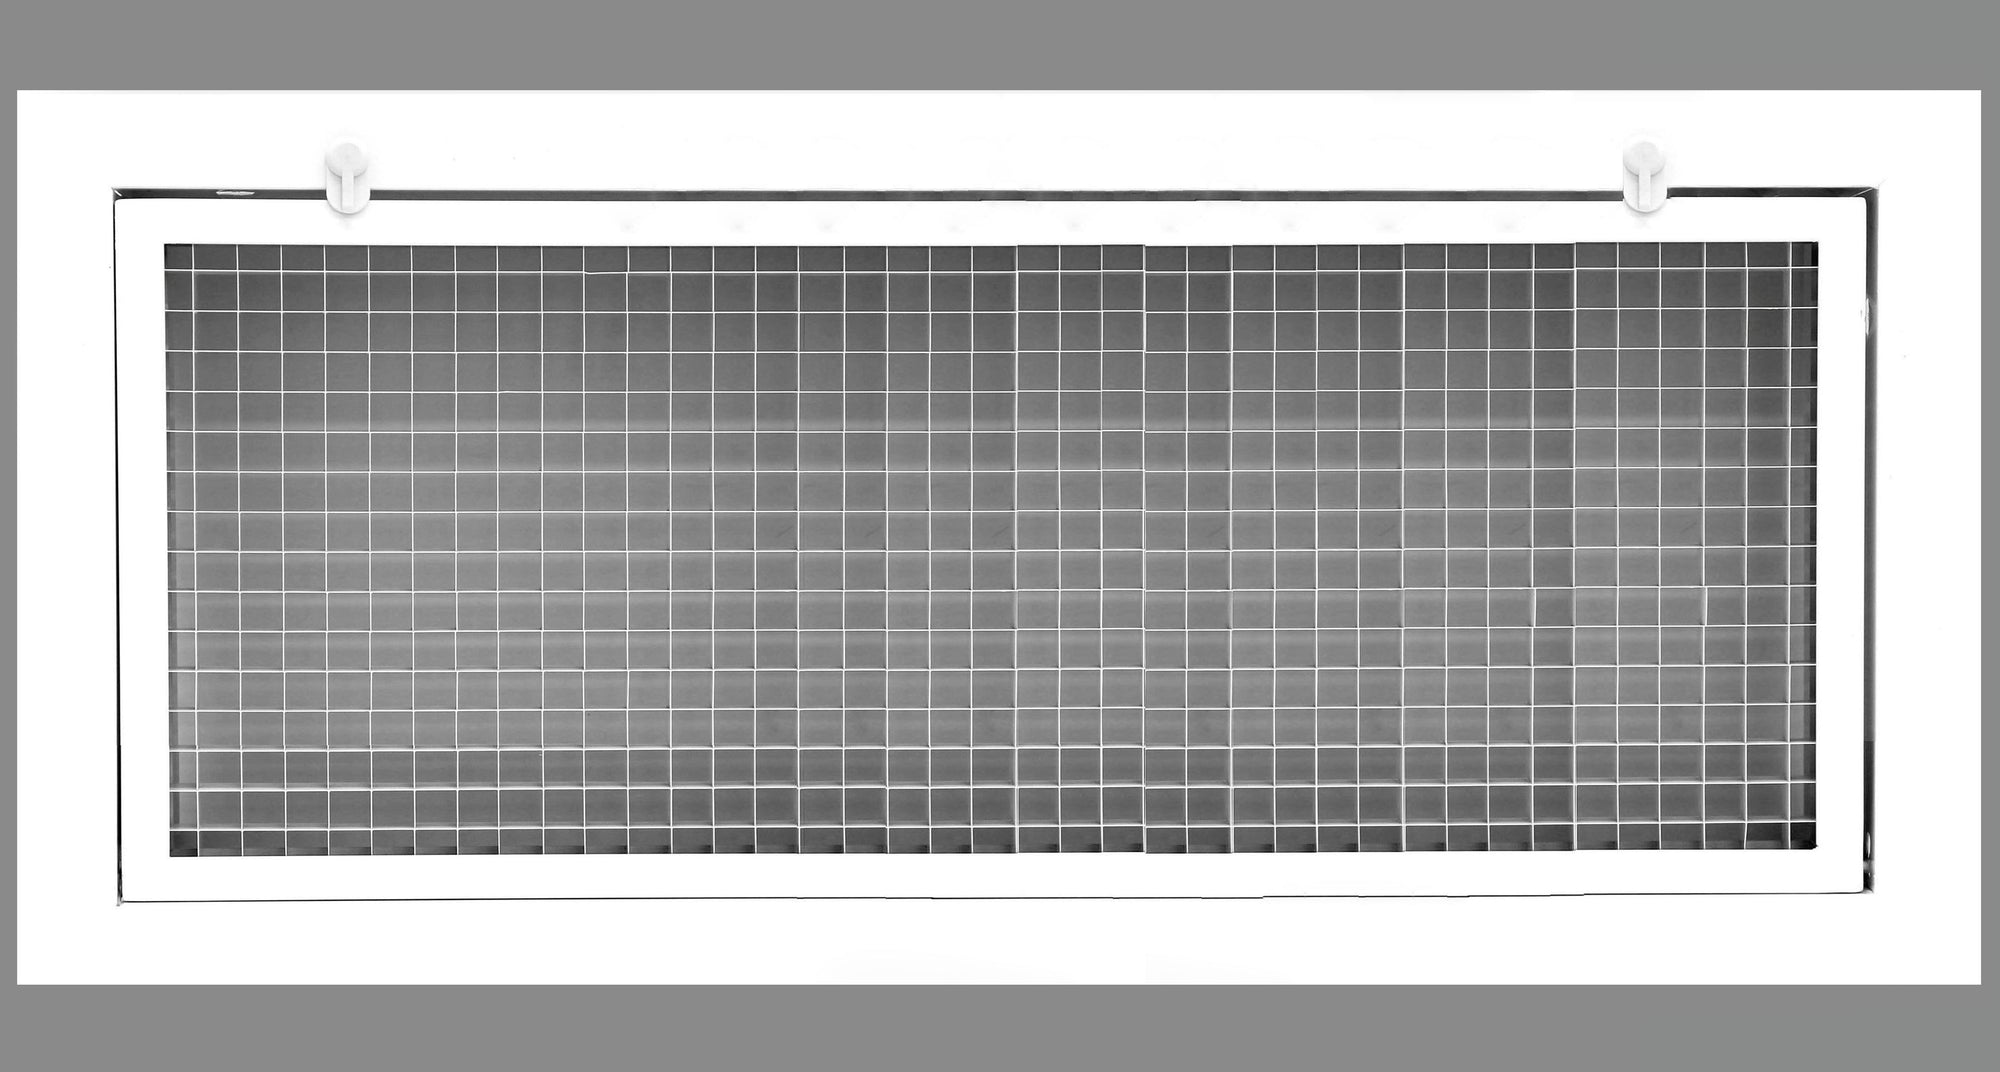 34" x 14" Cube Core Eggcrate Return Air Filter Grille for 1" Filter